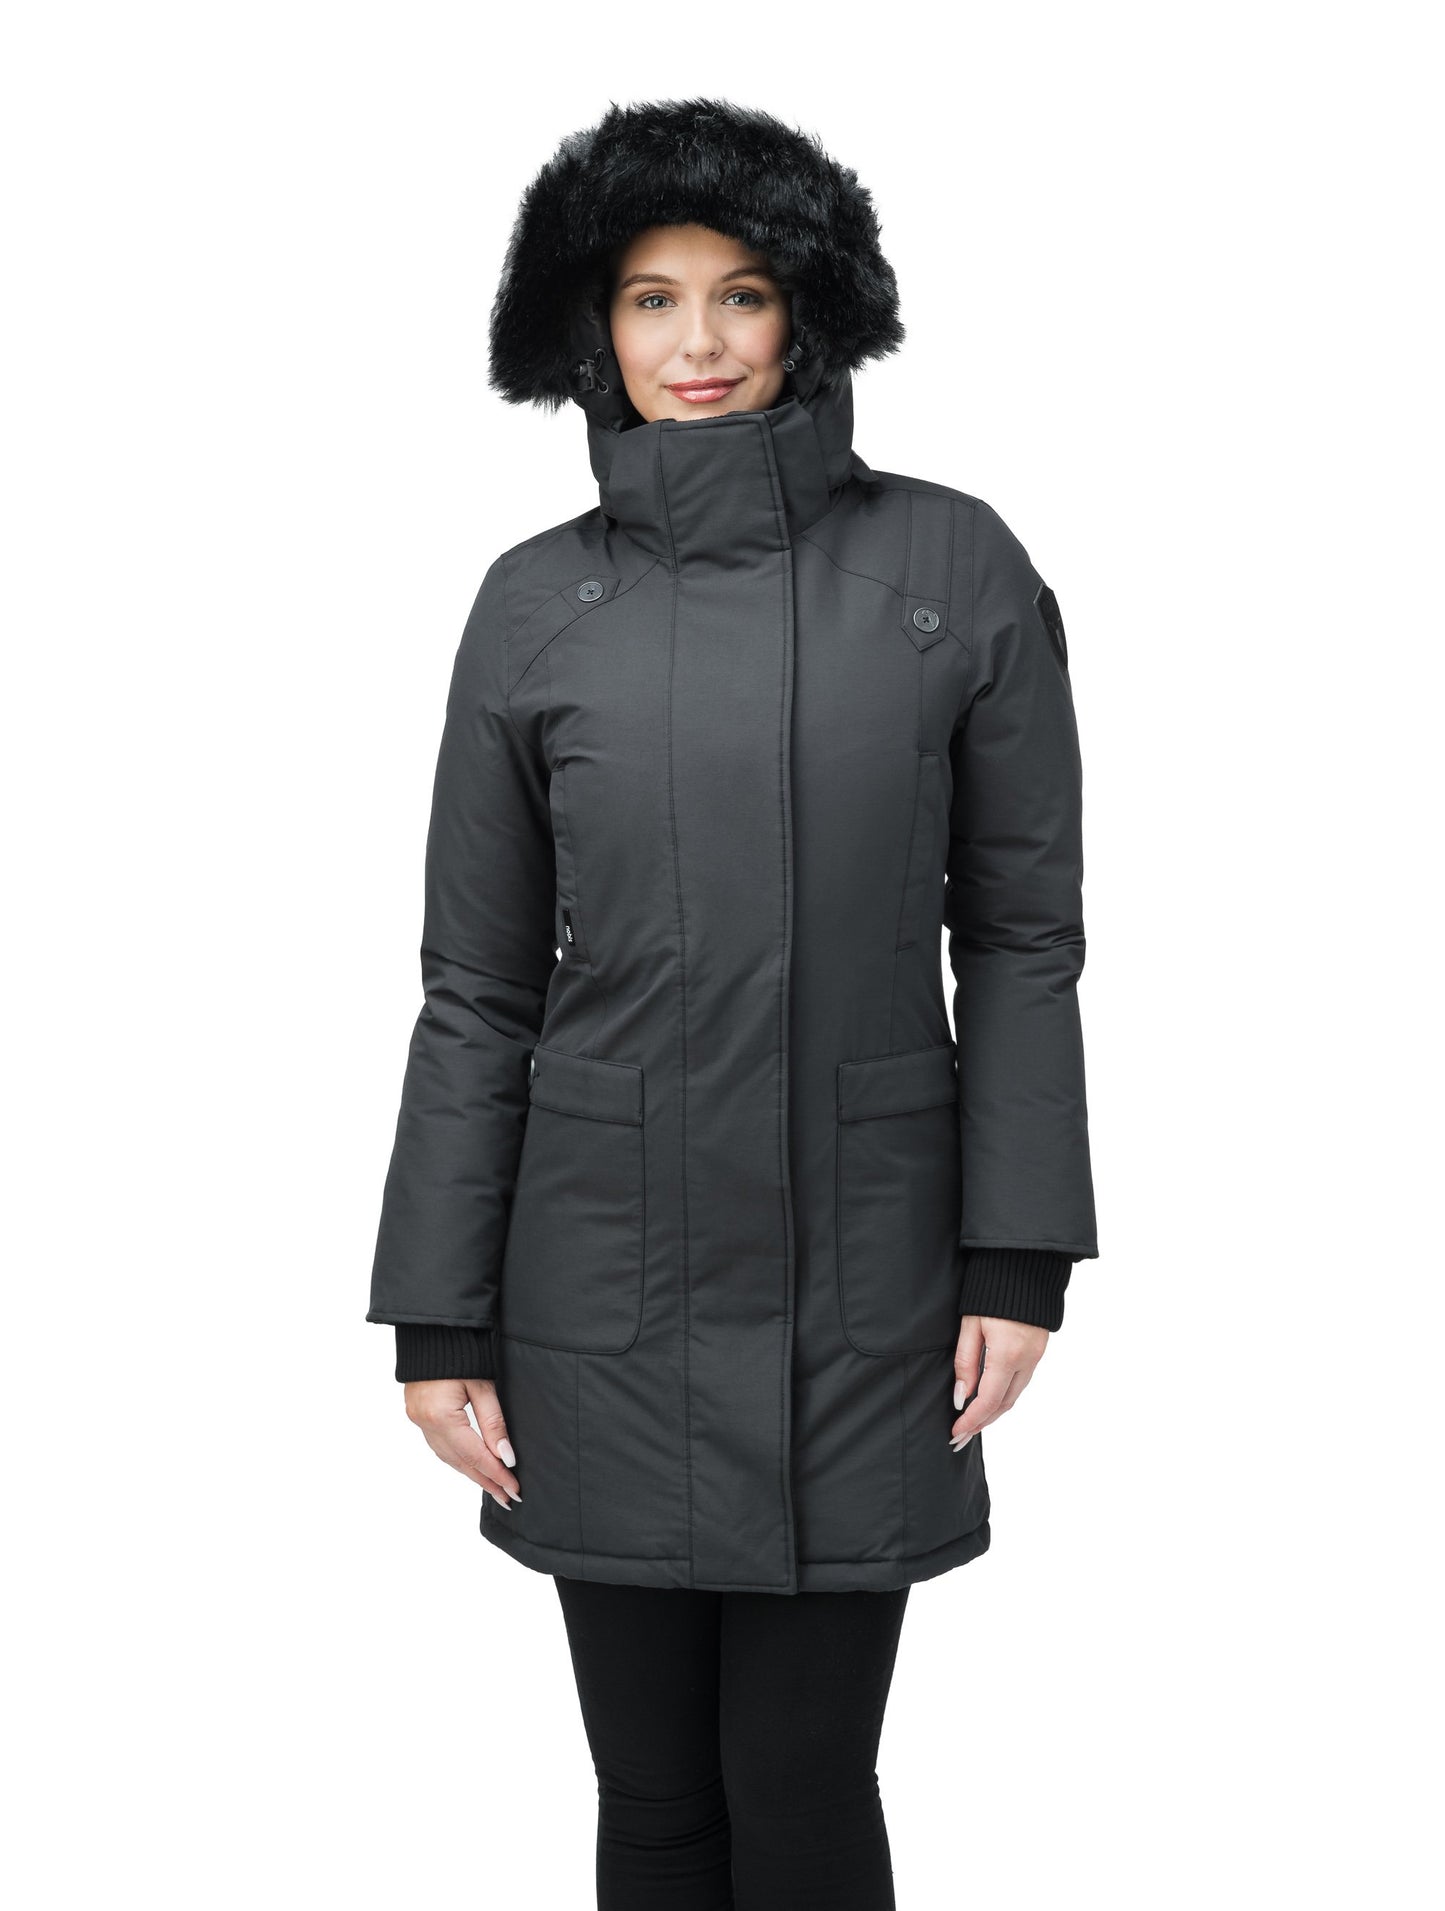 Women's thigh length down parka with removable hood and faux fur trim in Black